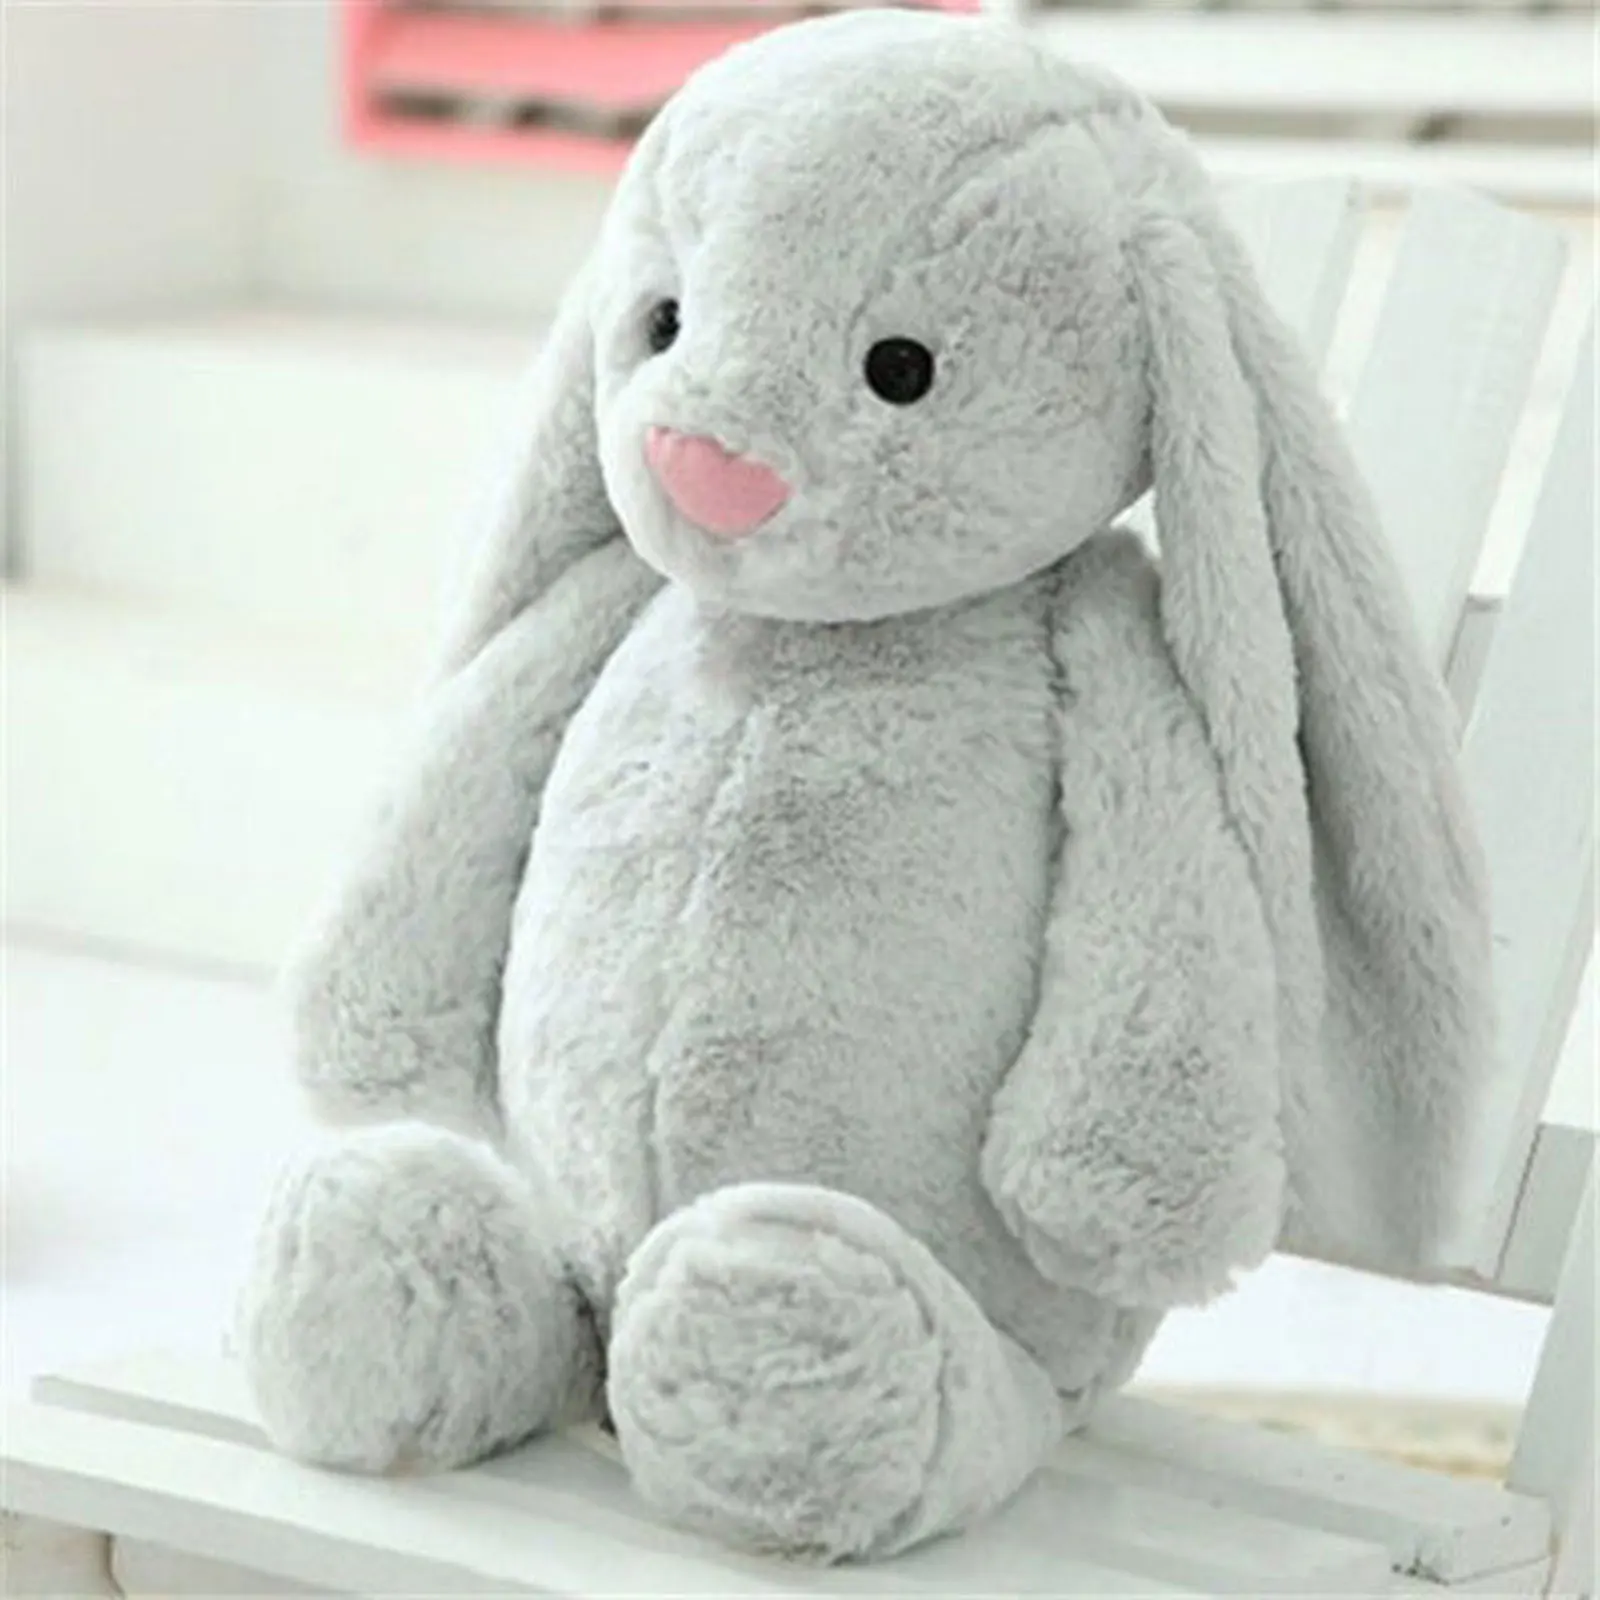 

Newest Arrival Cute Plush Toy Cartoon Rabbit Fluffy Children's Toy Simulation Doll Stuffed Toys For Kids Girlfriend Wife